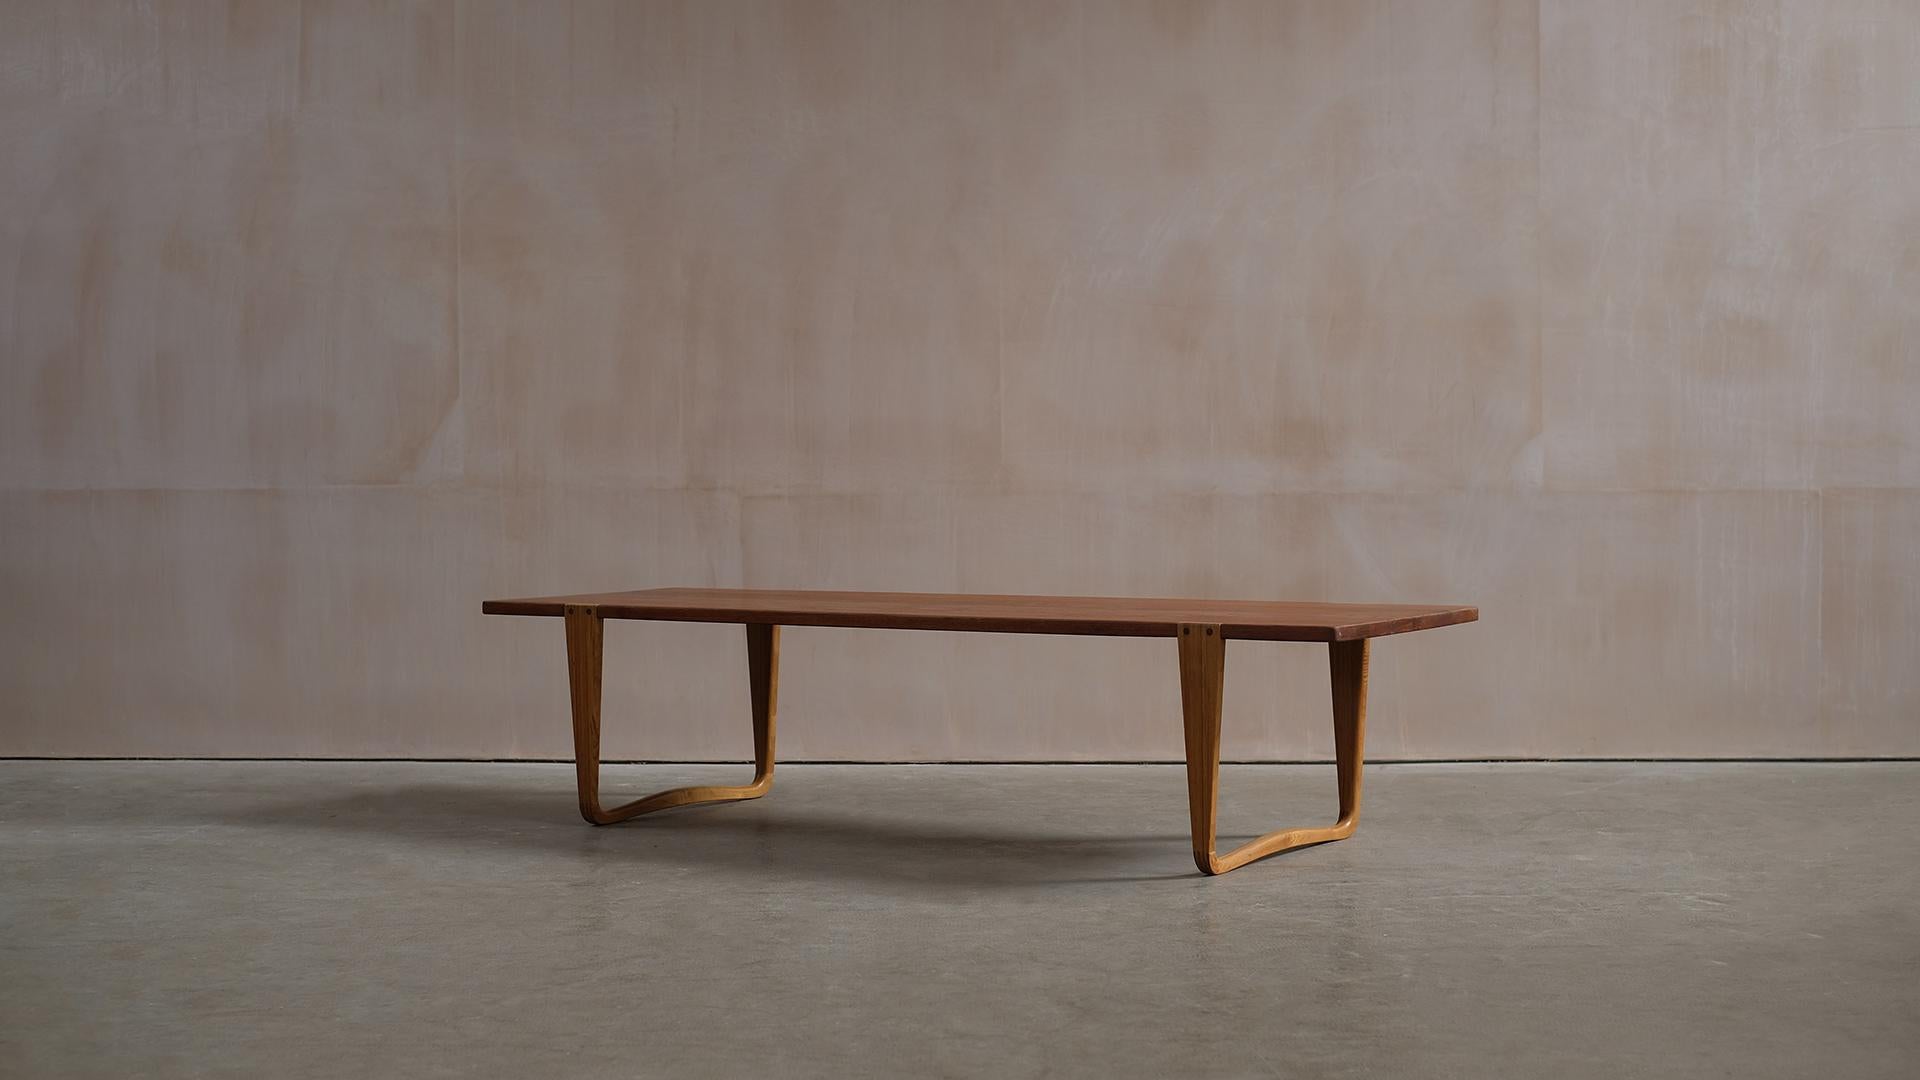 Ultra rare and beautiful large bench / coffee table designed by Michael Bloch for Nordisk Træ-Lamel, Denmark 1957. Staggeringly beautiful solid teak top with outstanding figuring and contrasting sculptural ash legs. A wonderful piece of classic high